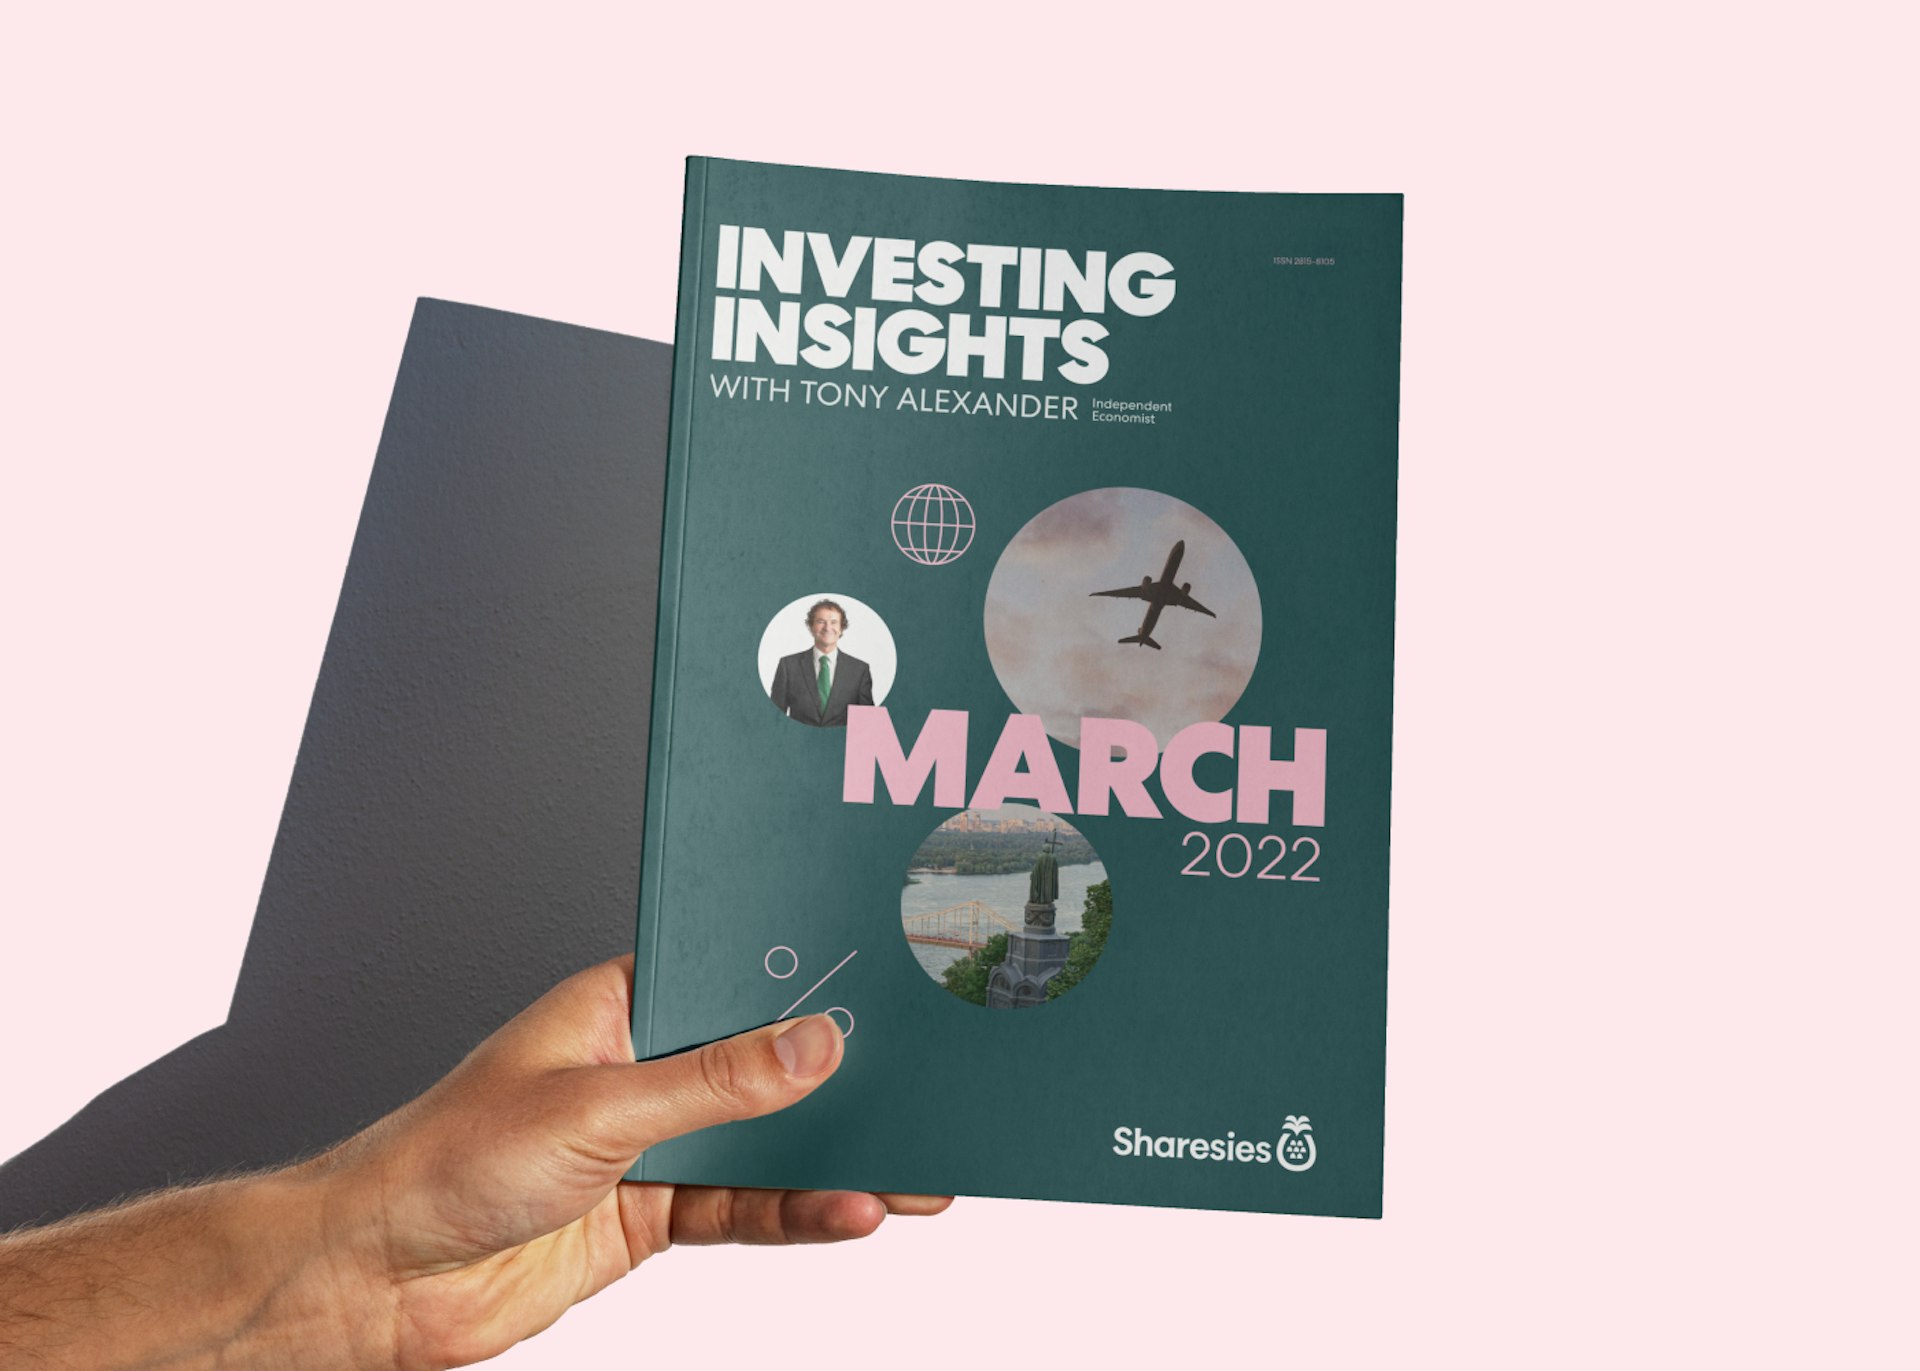 The March Investing Insights report is held in a hand in front of a pink backdrop.